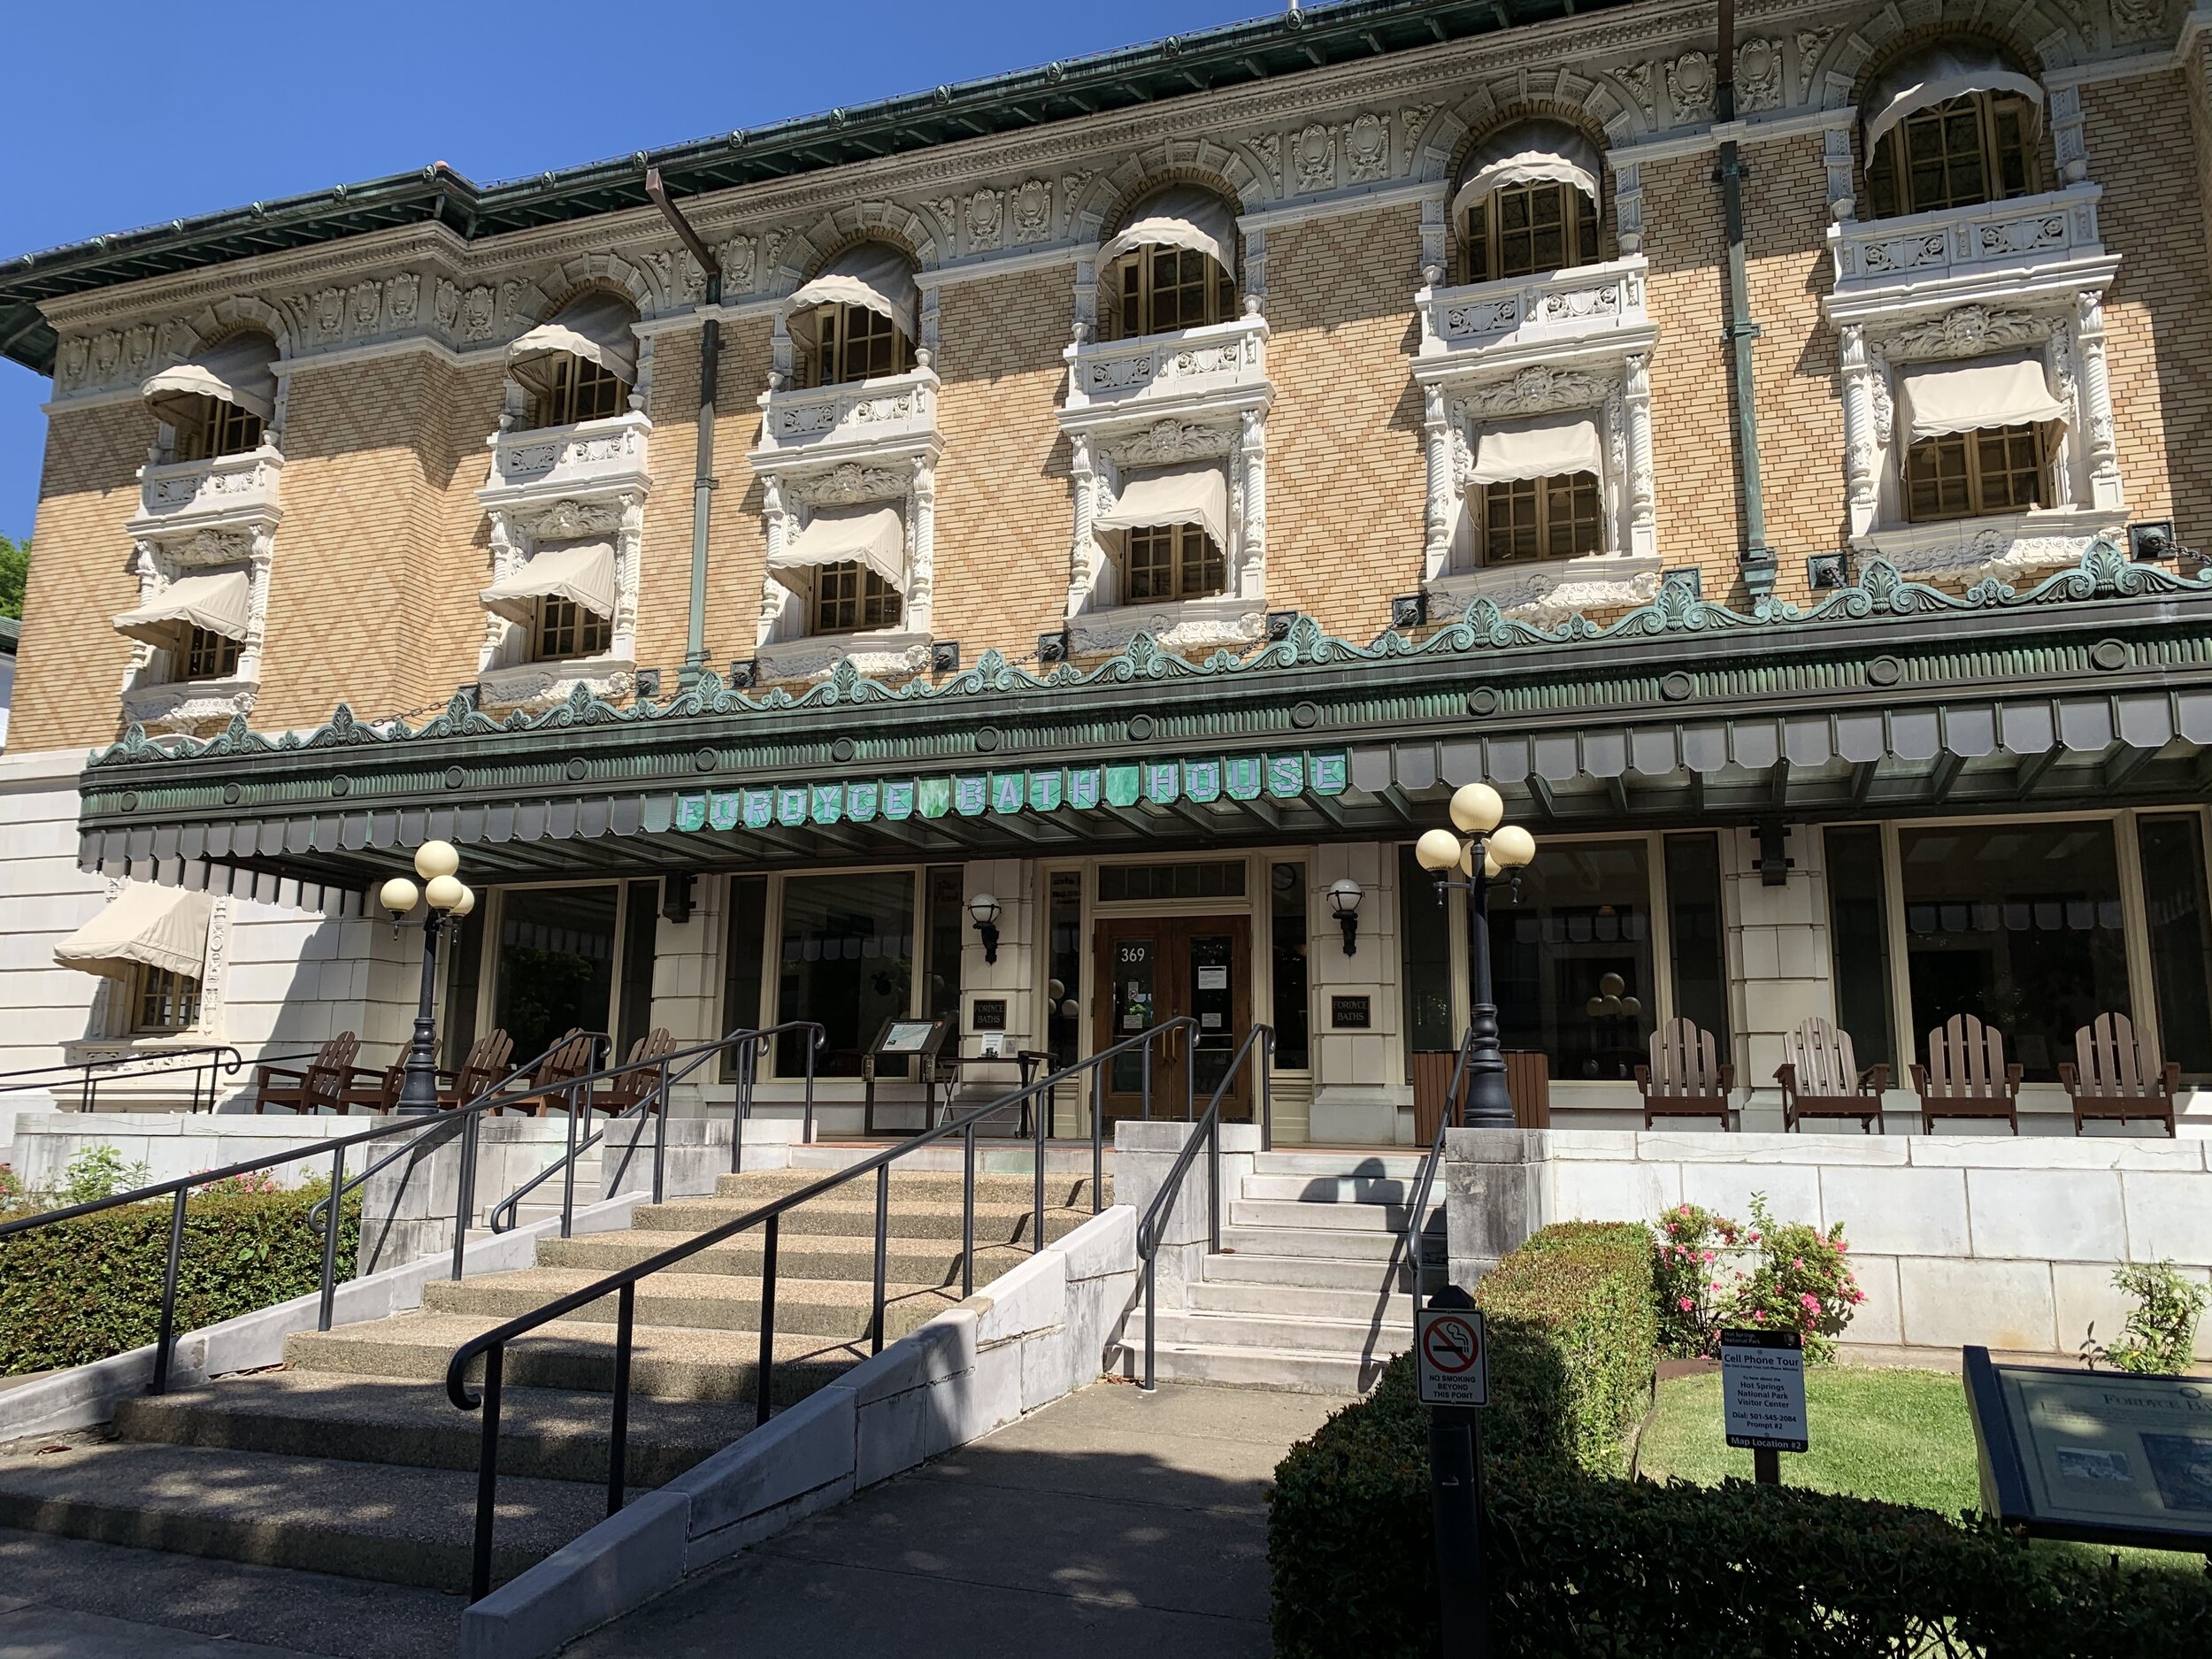  The Fordyce Bathhouse, built in 1912, became the first bathhouse on the Row to go out of business in the 1960s, but it has been extensively restored and is now a historically furnished museum, and functions as the park’s visitor center. Within the p